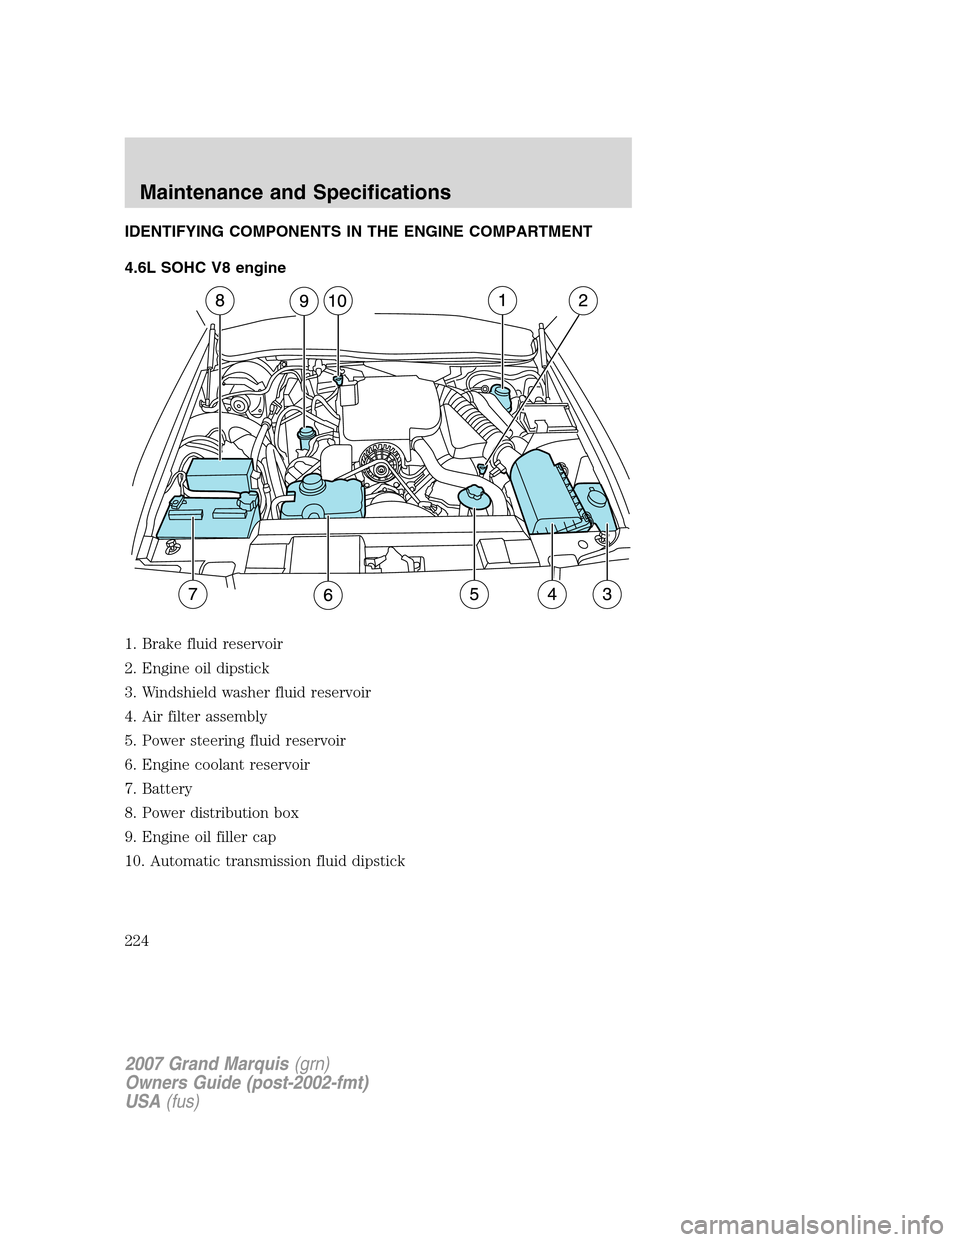 Mercury Grand Marquis 2007  s Service Manual IDENTIFYING COMPONENTS IN THE ENGINE COMPARTMENT
4.6L SOHC V8 engine
1. Brake fluid reservoir
2. Engine oil dipstick
3. Windshield washer fluid reservoir
4. Air filter assembly
5. Power steering fluid